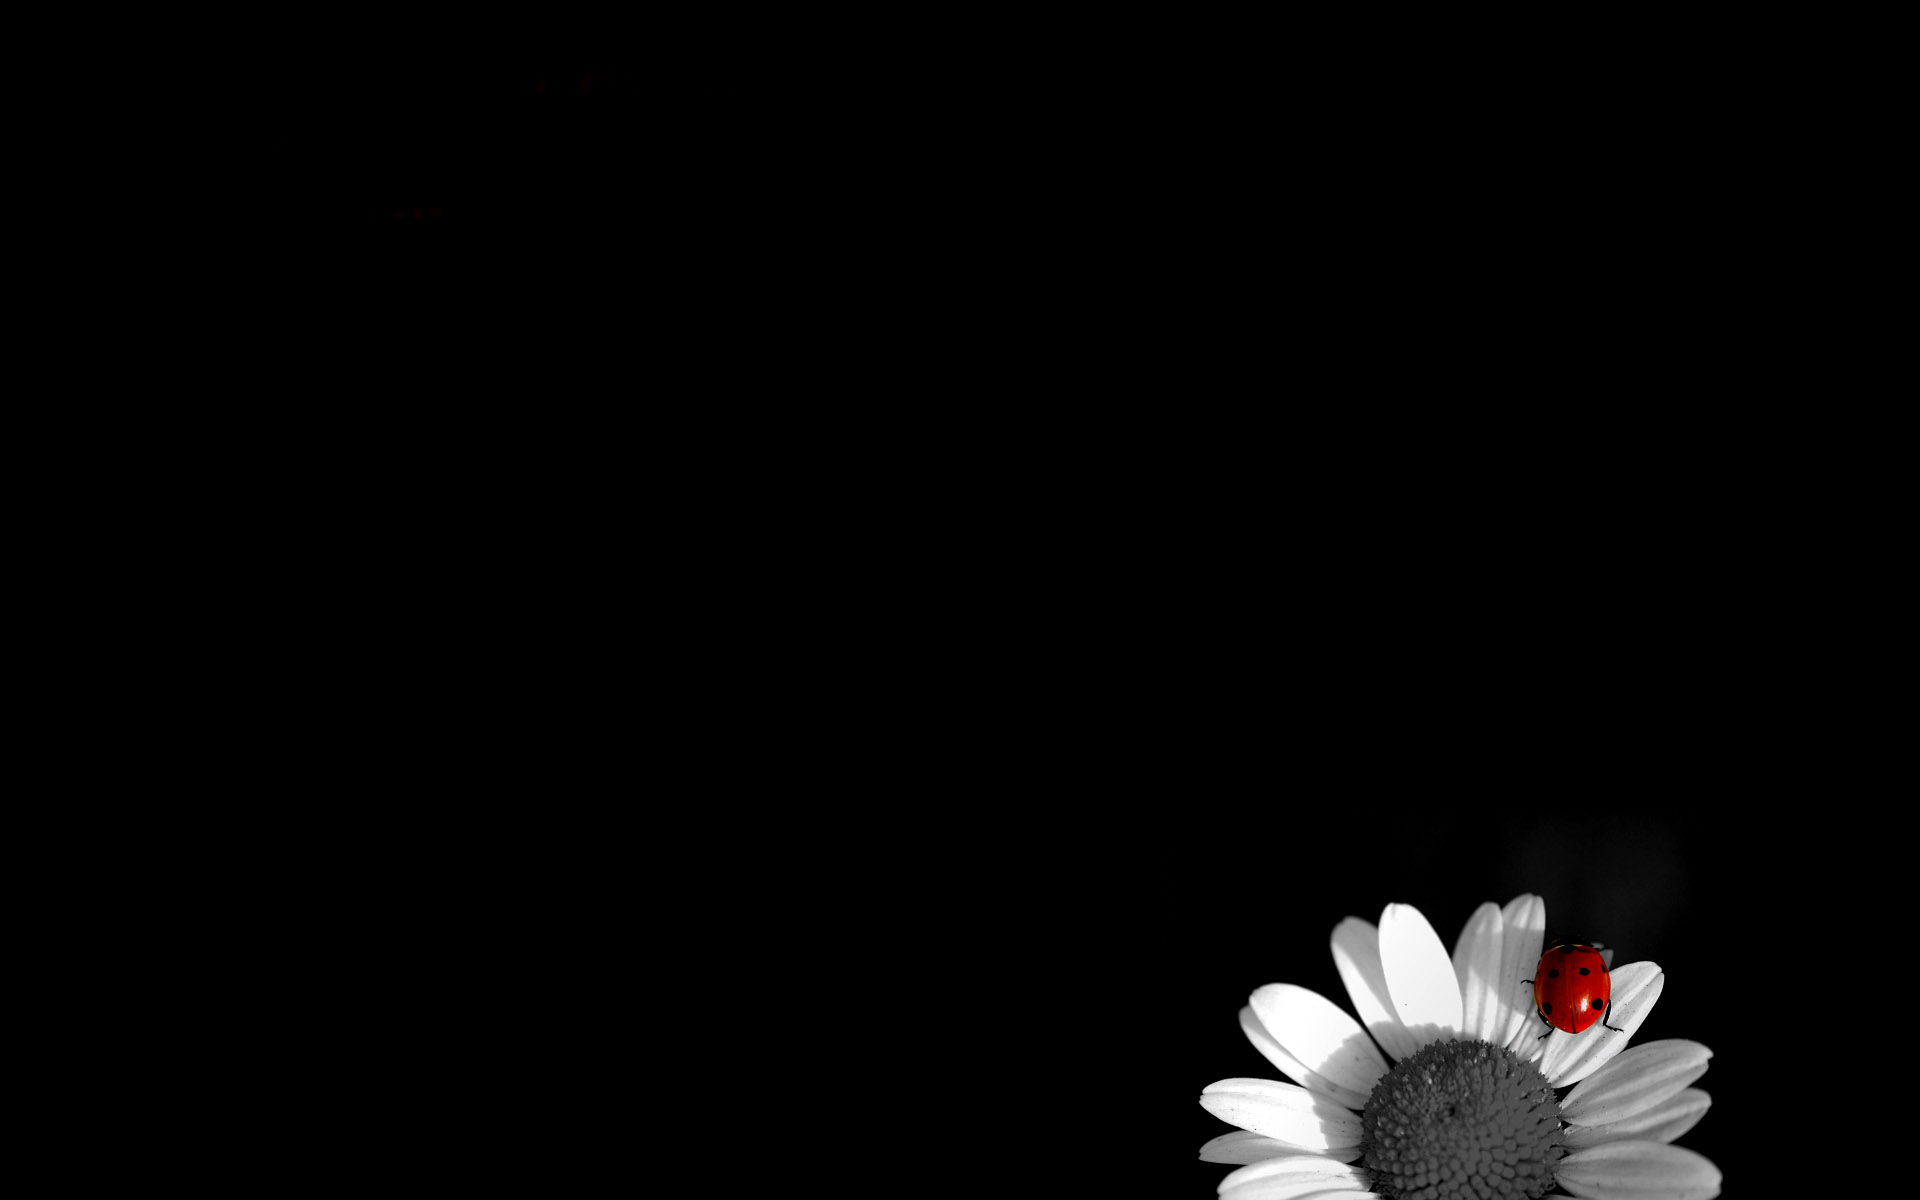 On White Flower With Black Background HD Wallpaper X